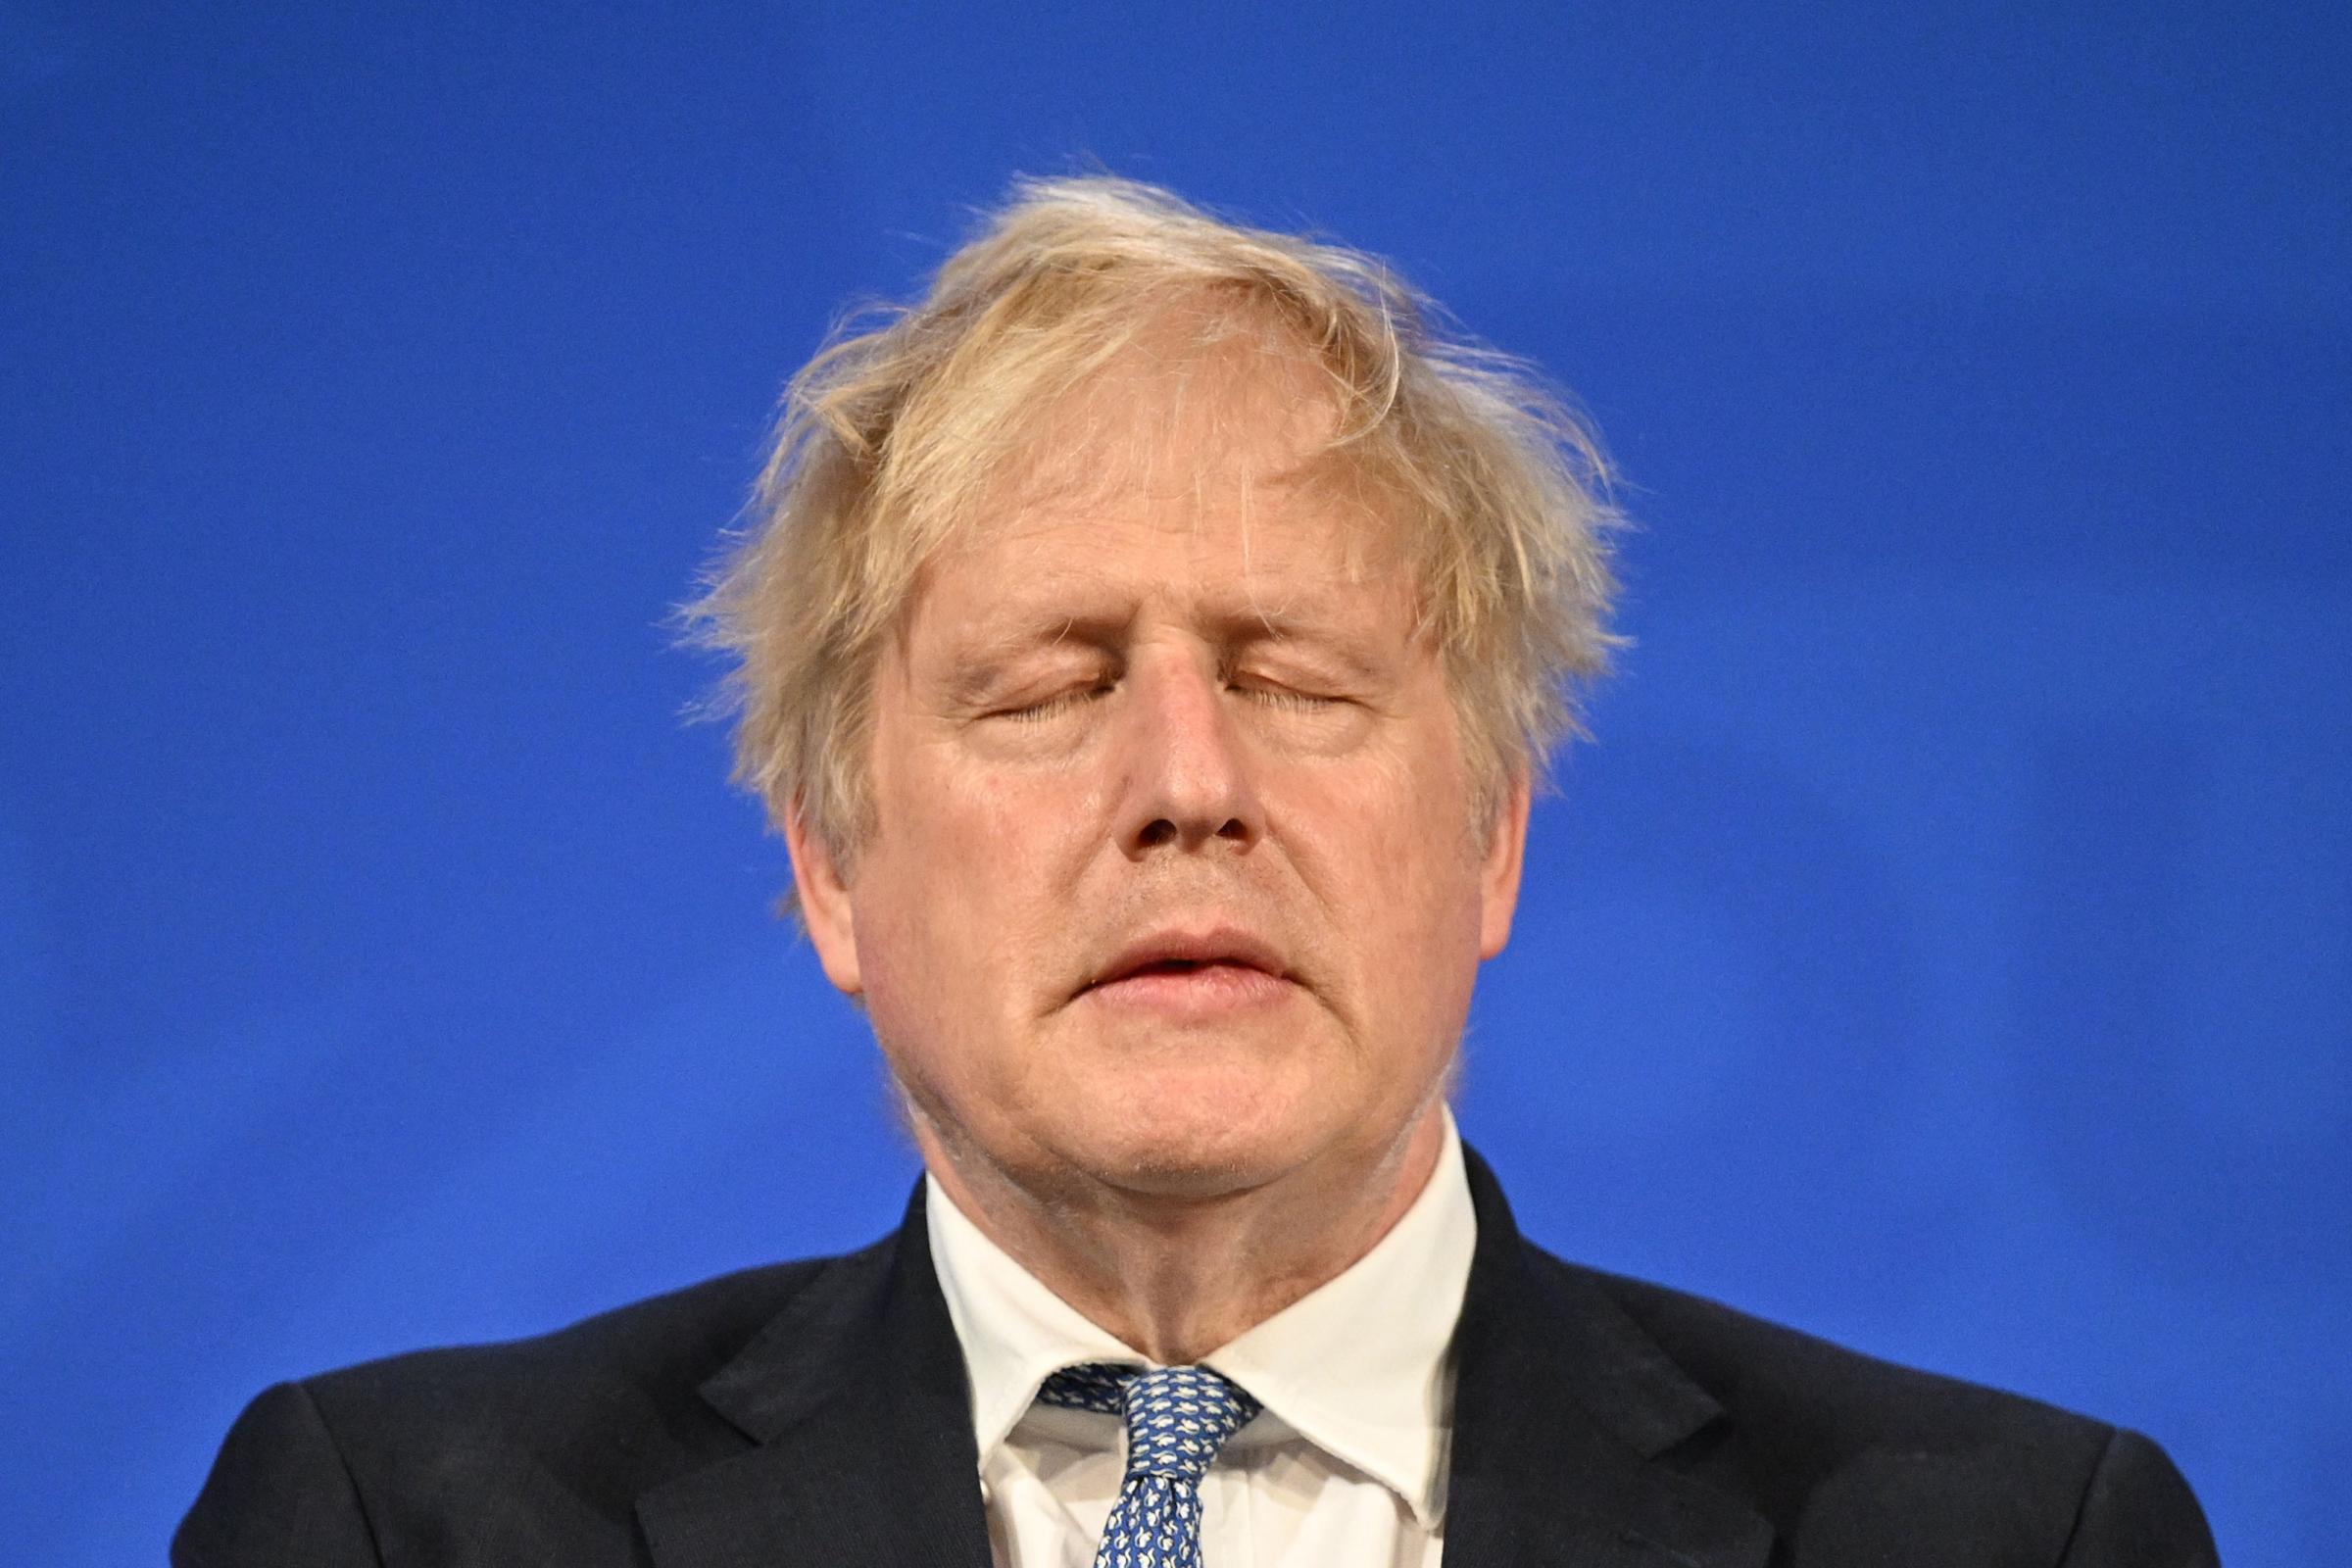 Boris Johnson clings on the Prime Minister role as ministers abandon government